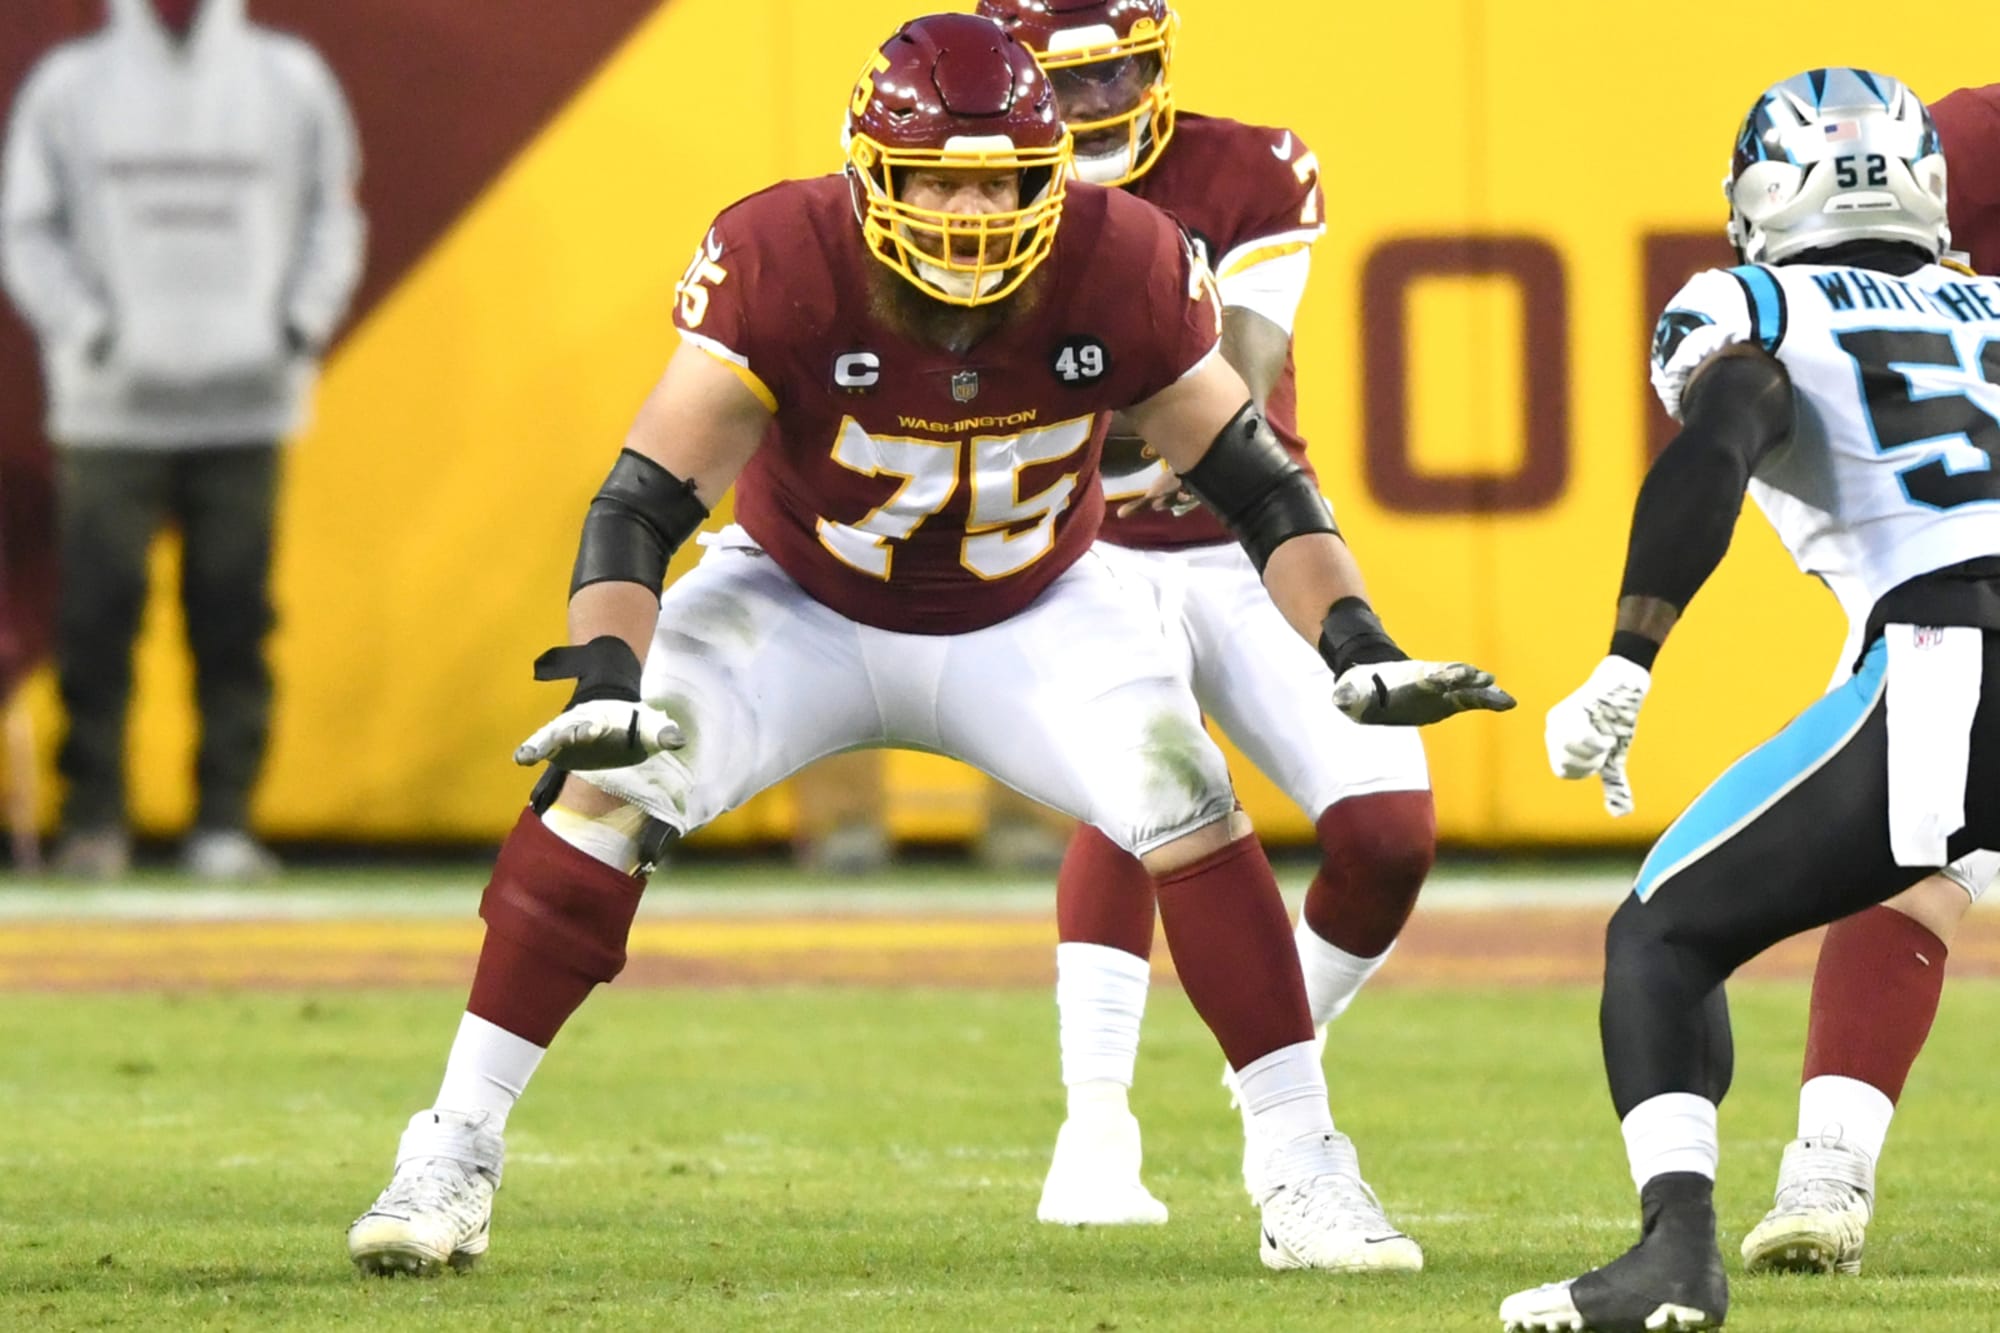 Building an elite offensive line with 2022 NFL free agents